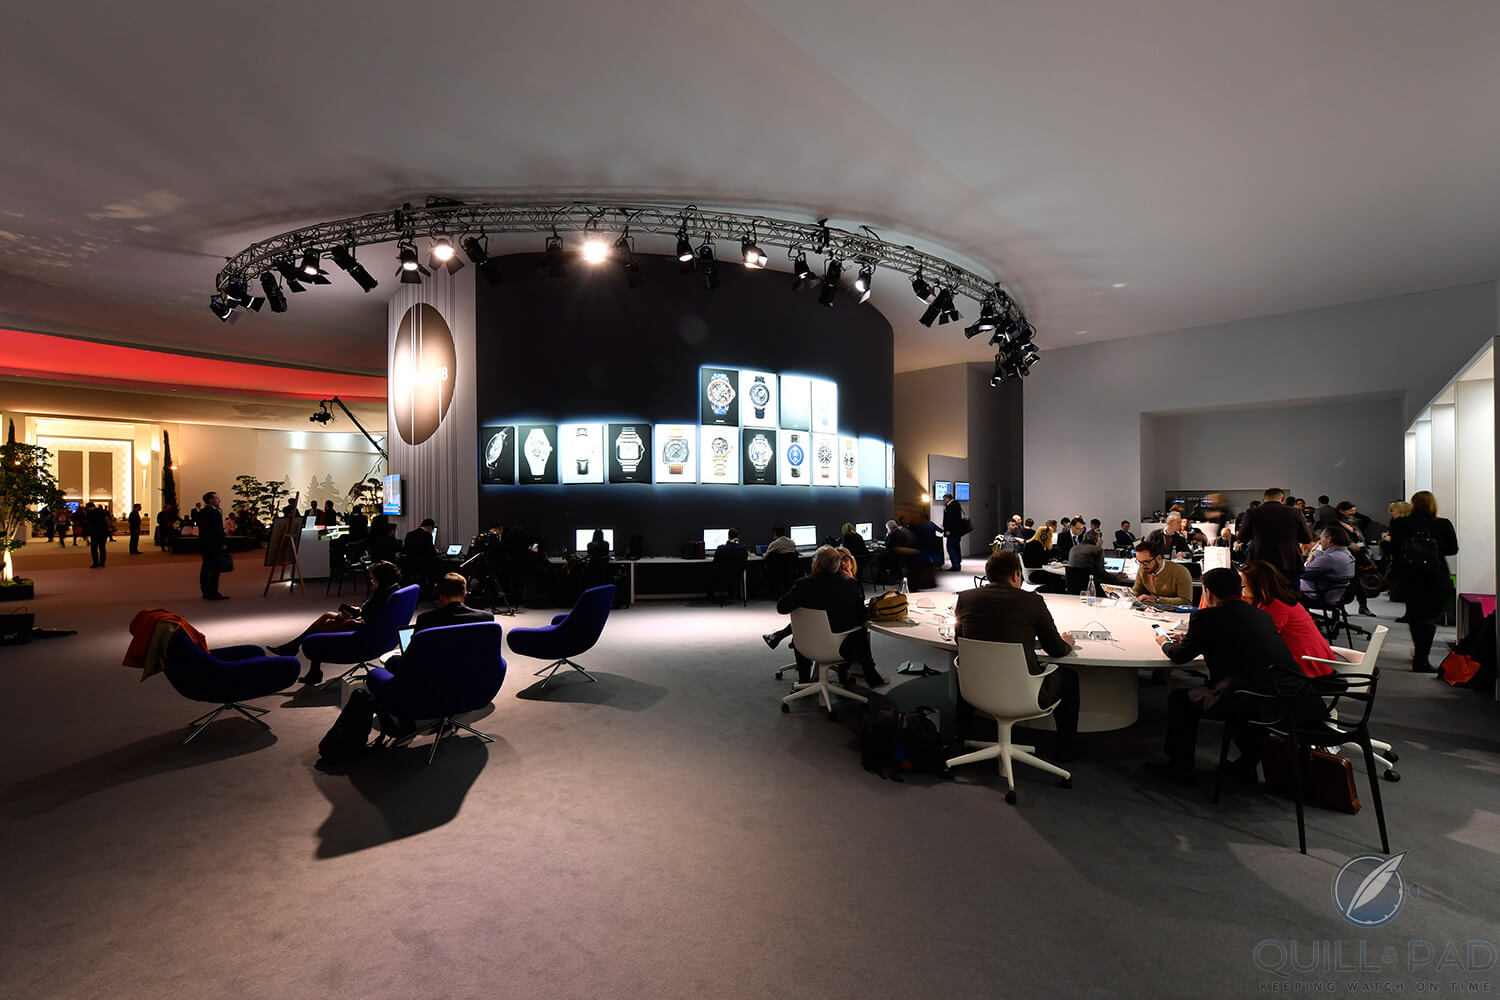 New press center at the 2018 SIHH